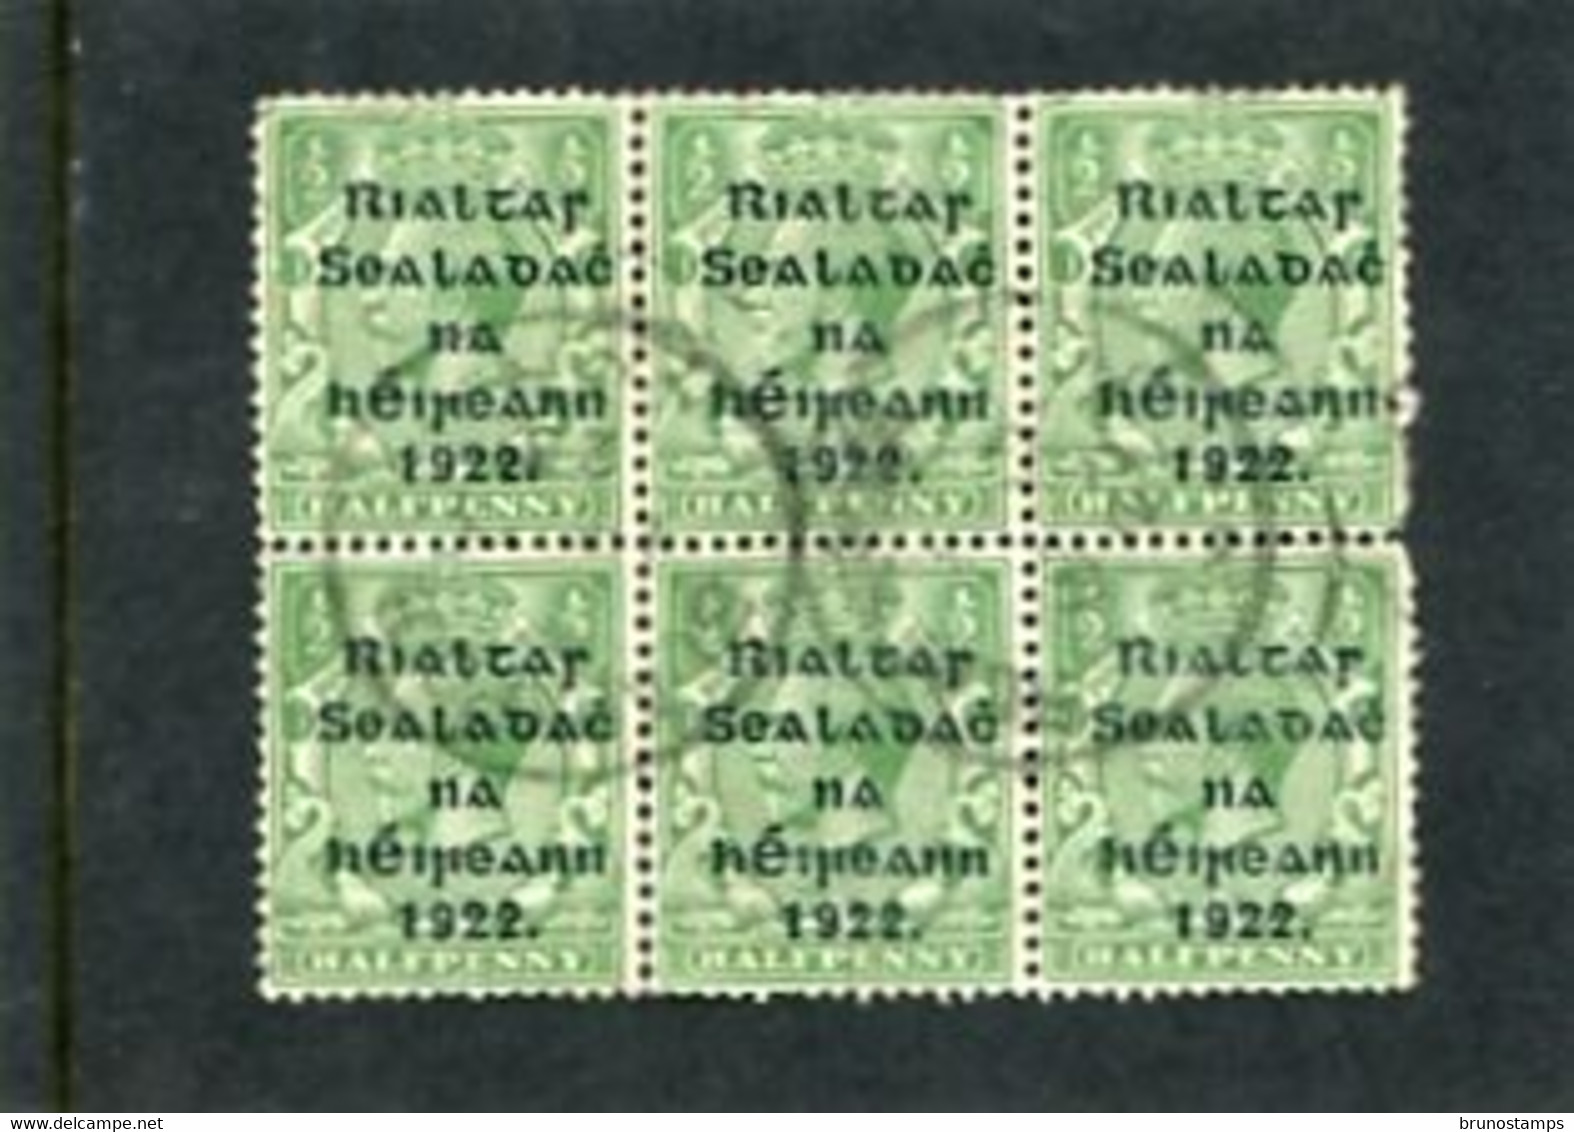 IRELAND/EIRE - 1922  1/2d. OVERPRINTED THOM  WIDER  DATE  BLOCK OF 6   FINE  USED  SG 47 - Oblitérés